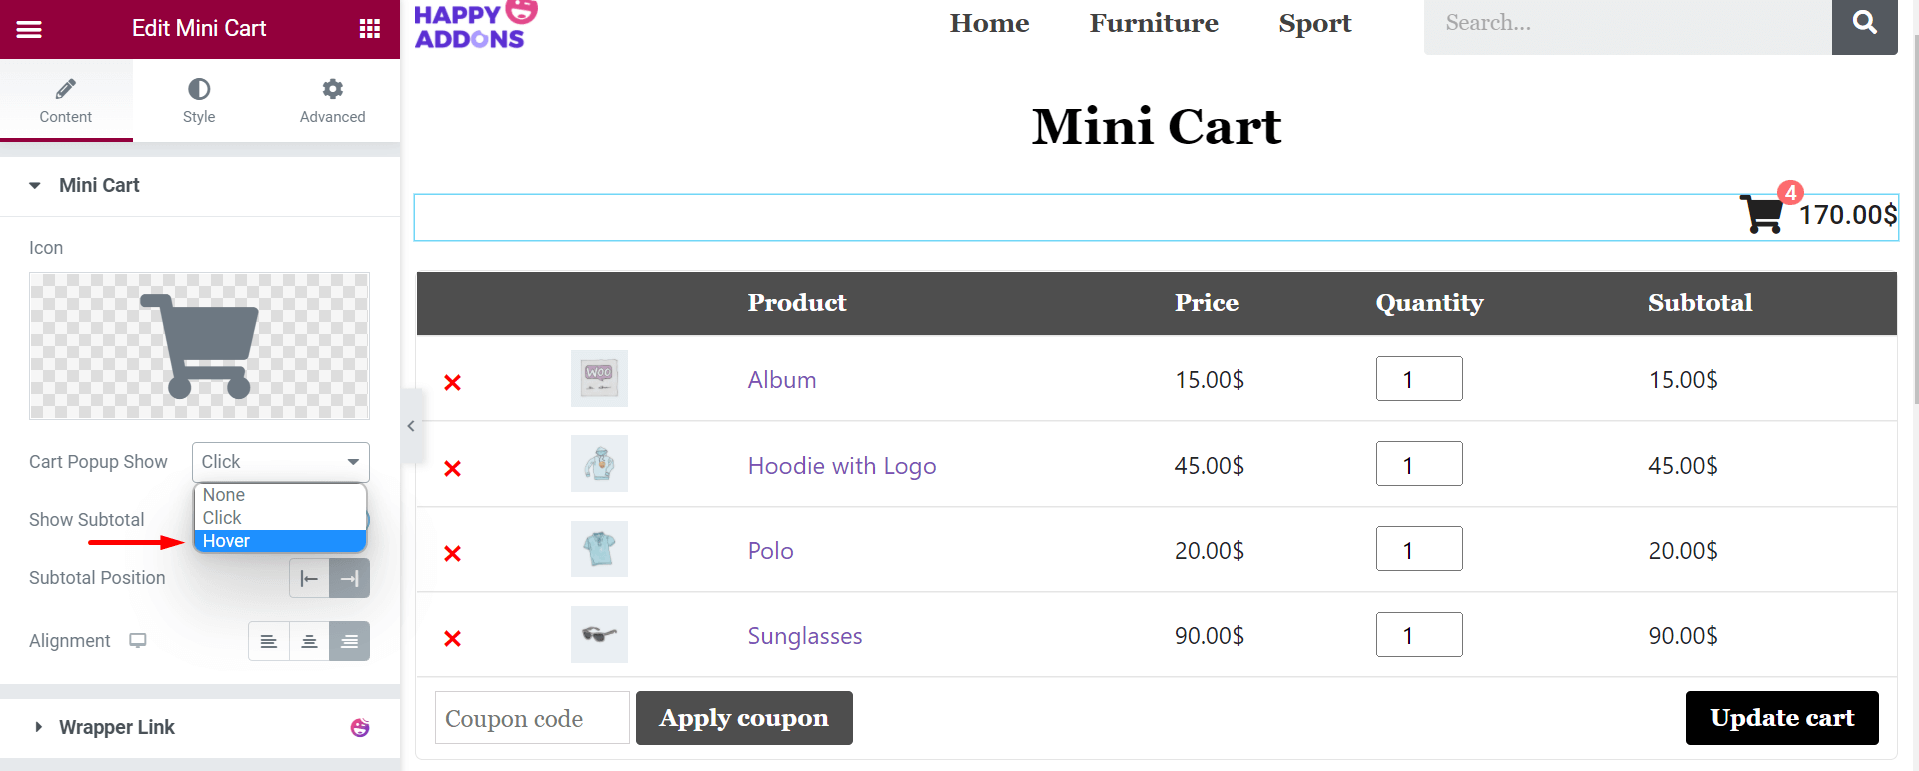 Change Hover Style of Mini Cart